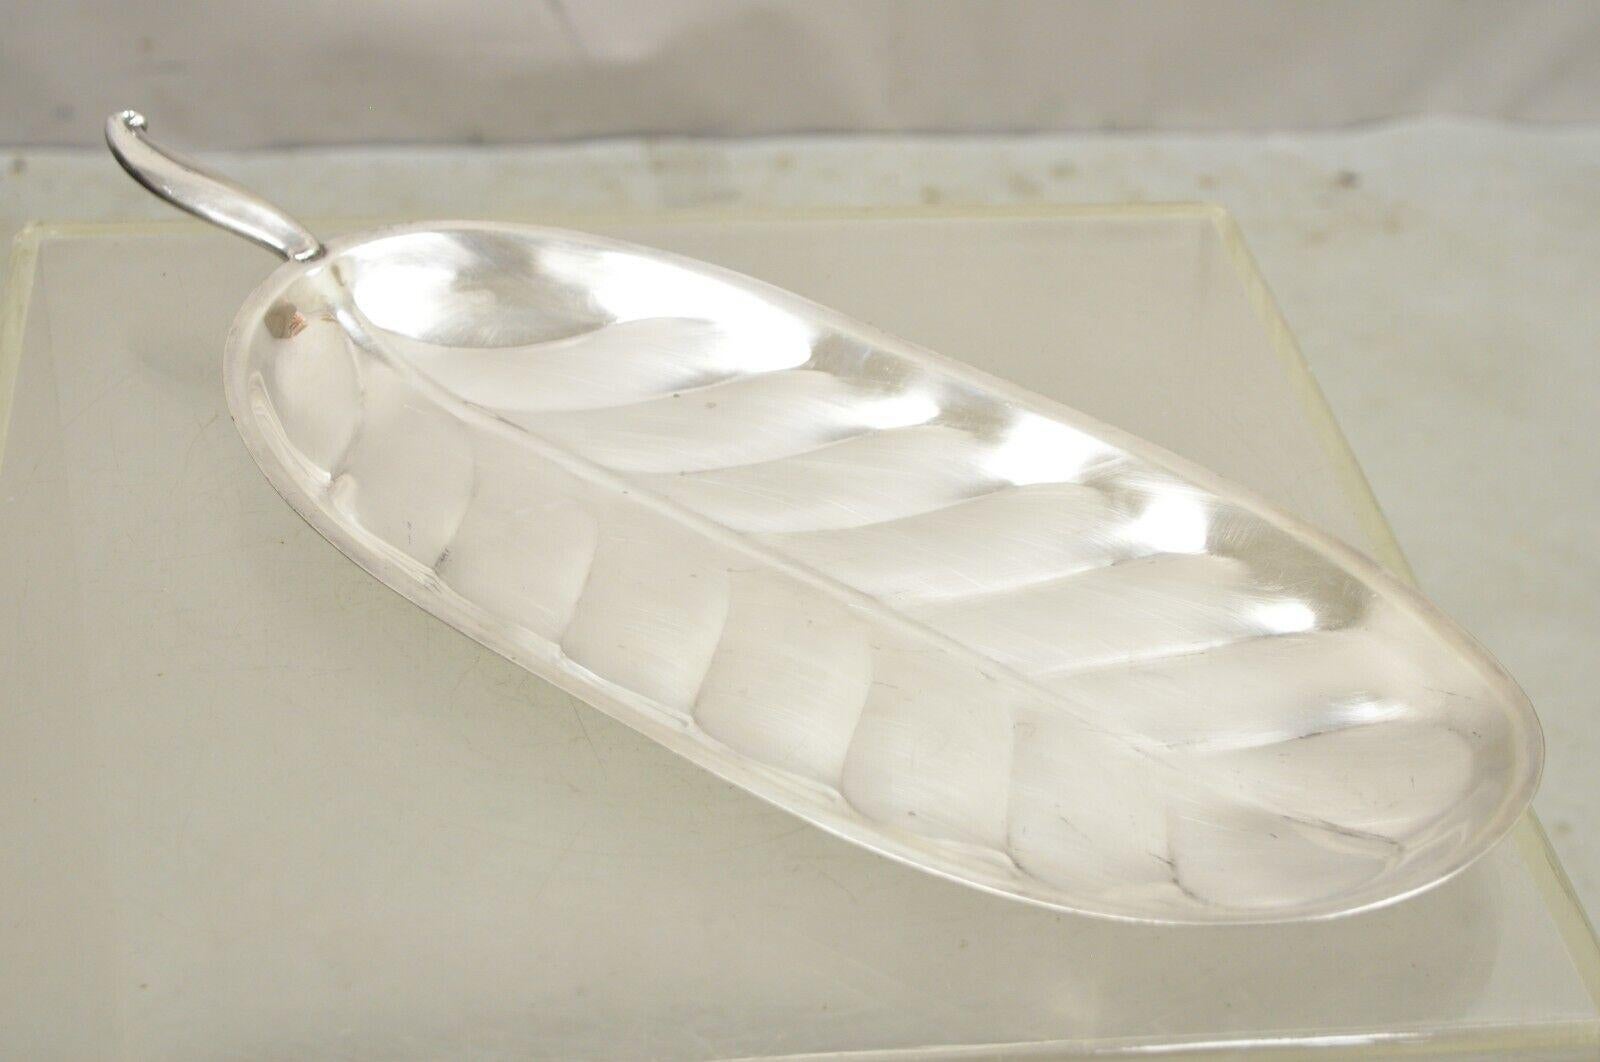 F.B. Rogers Silver Plate Oval Banana Leaf Form Serving Tray Platter with Handle. Item features the original label, clean modernist lines, great style and form. Circa Mid 20th Century. Measurements: 1.5